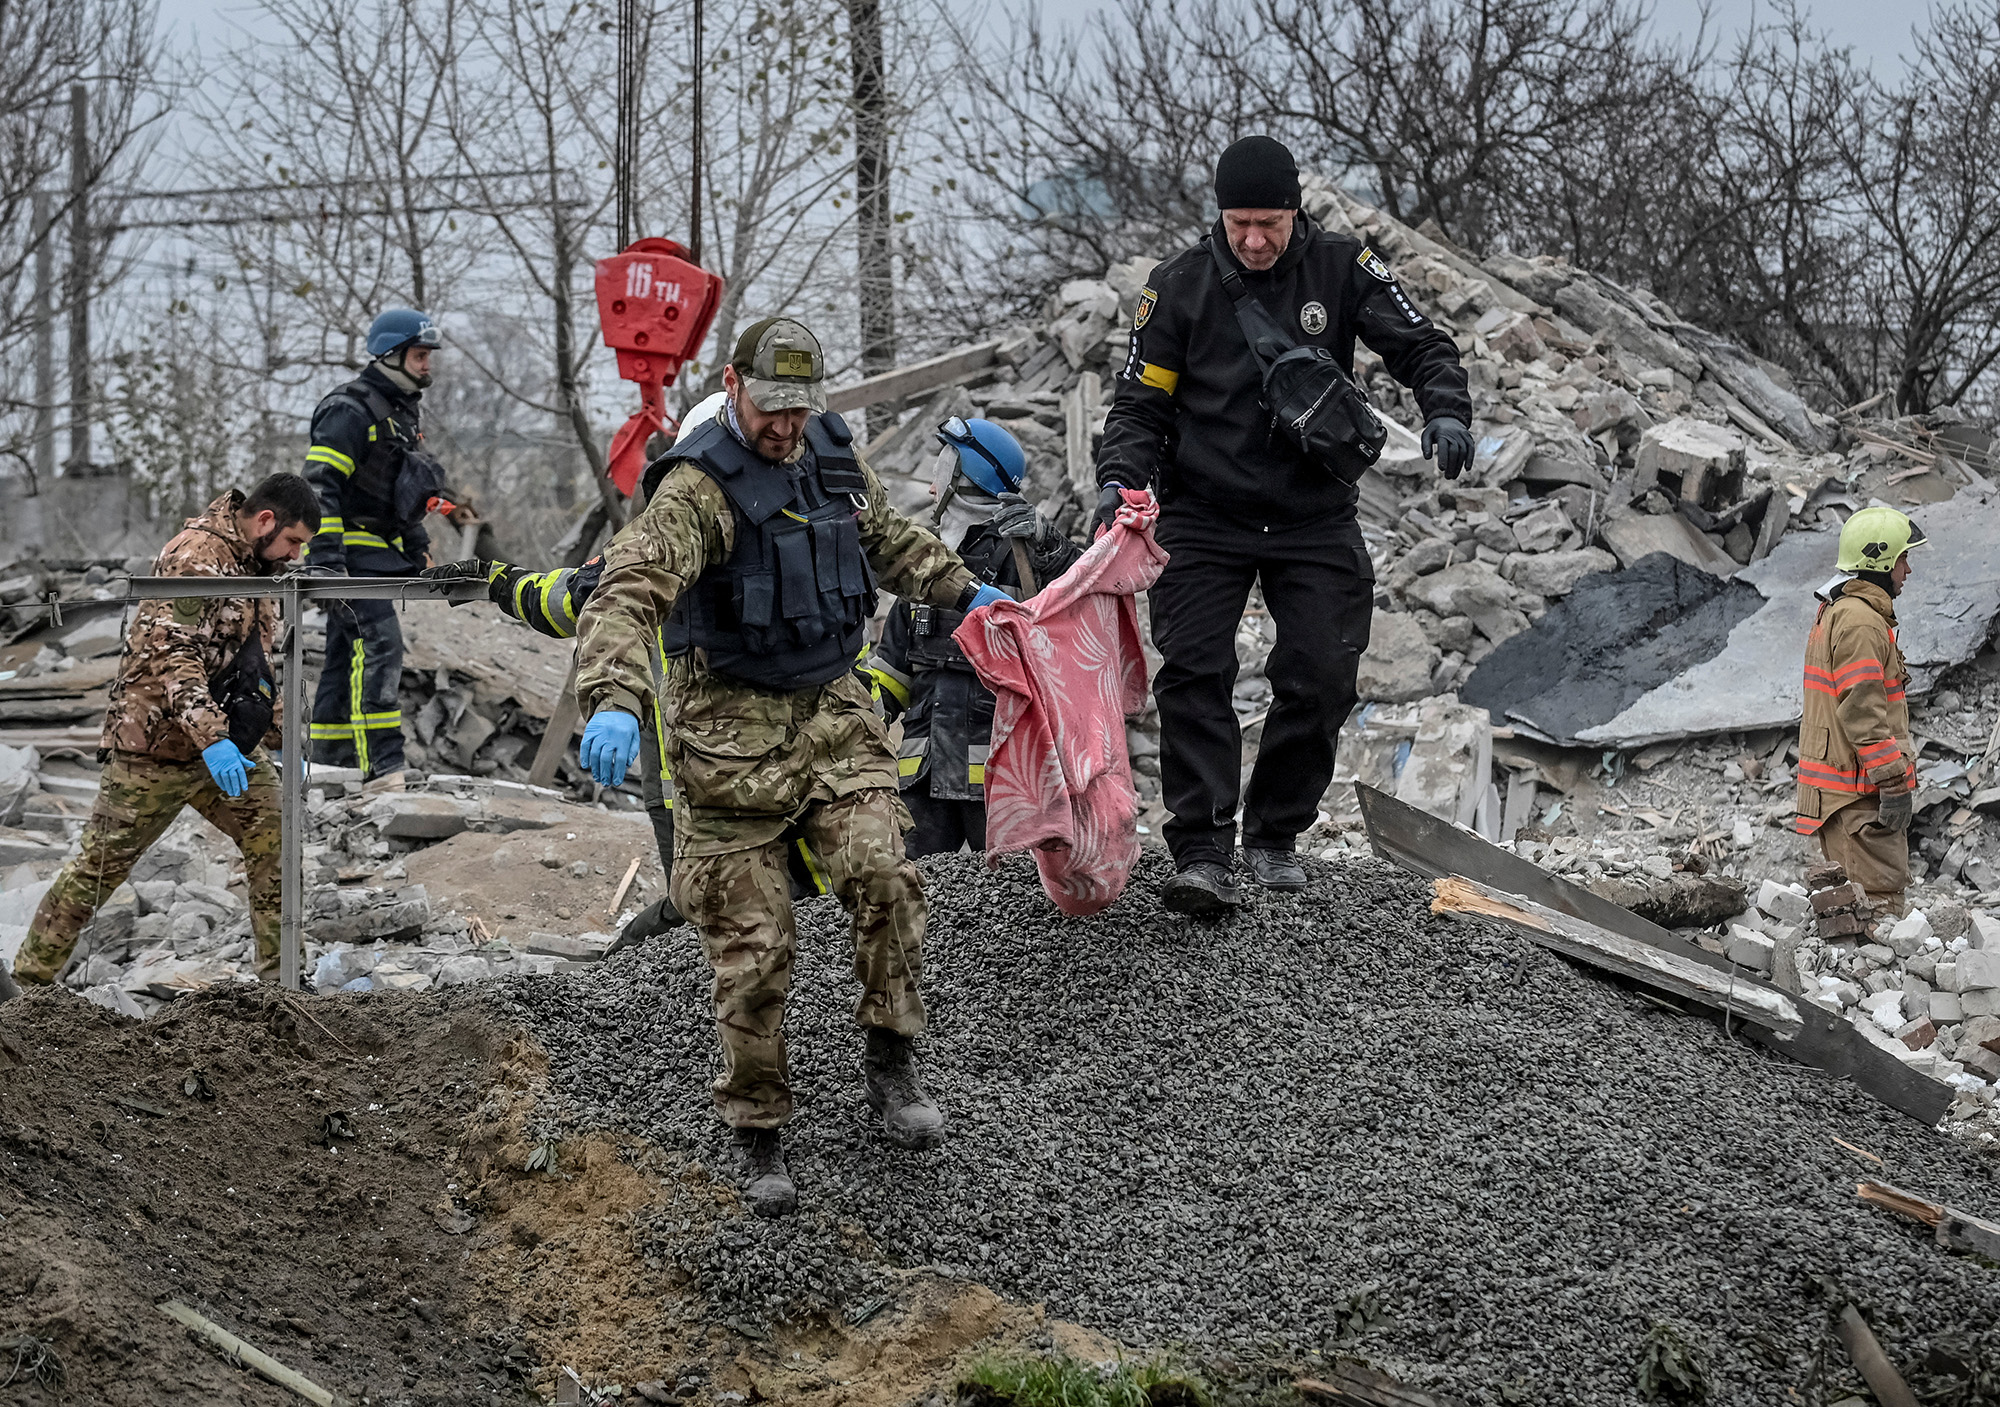 Police officers carry fragments of a body found under debris of a residential house destroyed by a Russian missile strike in the town of Vilniansk, Zaporizhzhia region, Ukraine, on November 17.